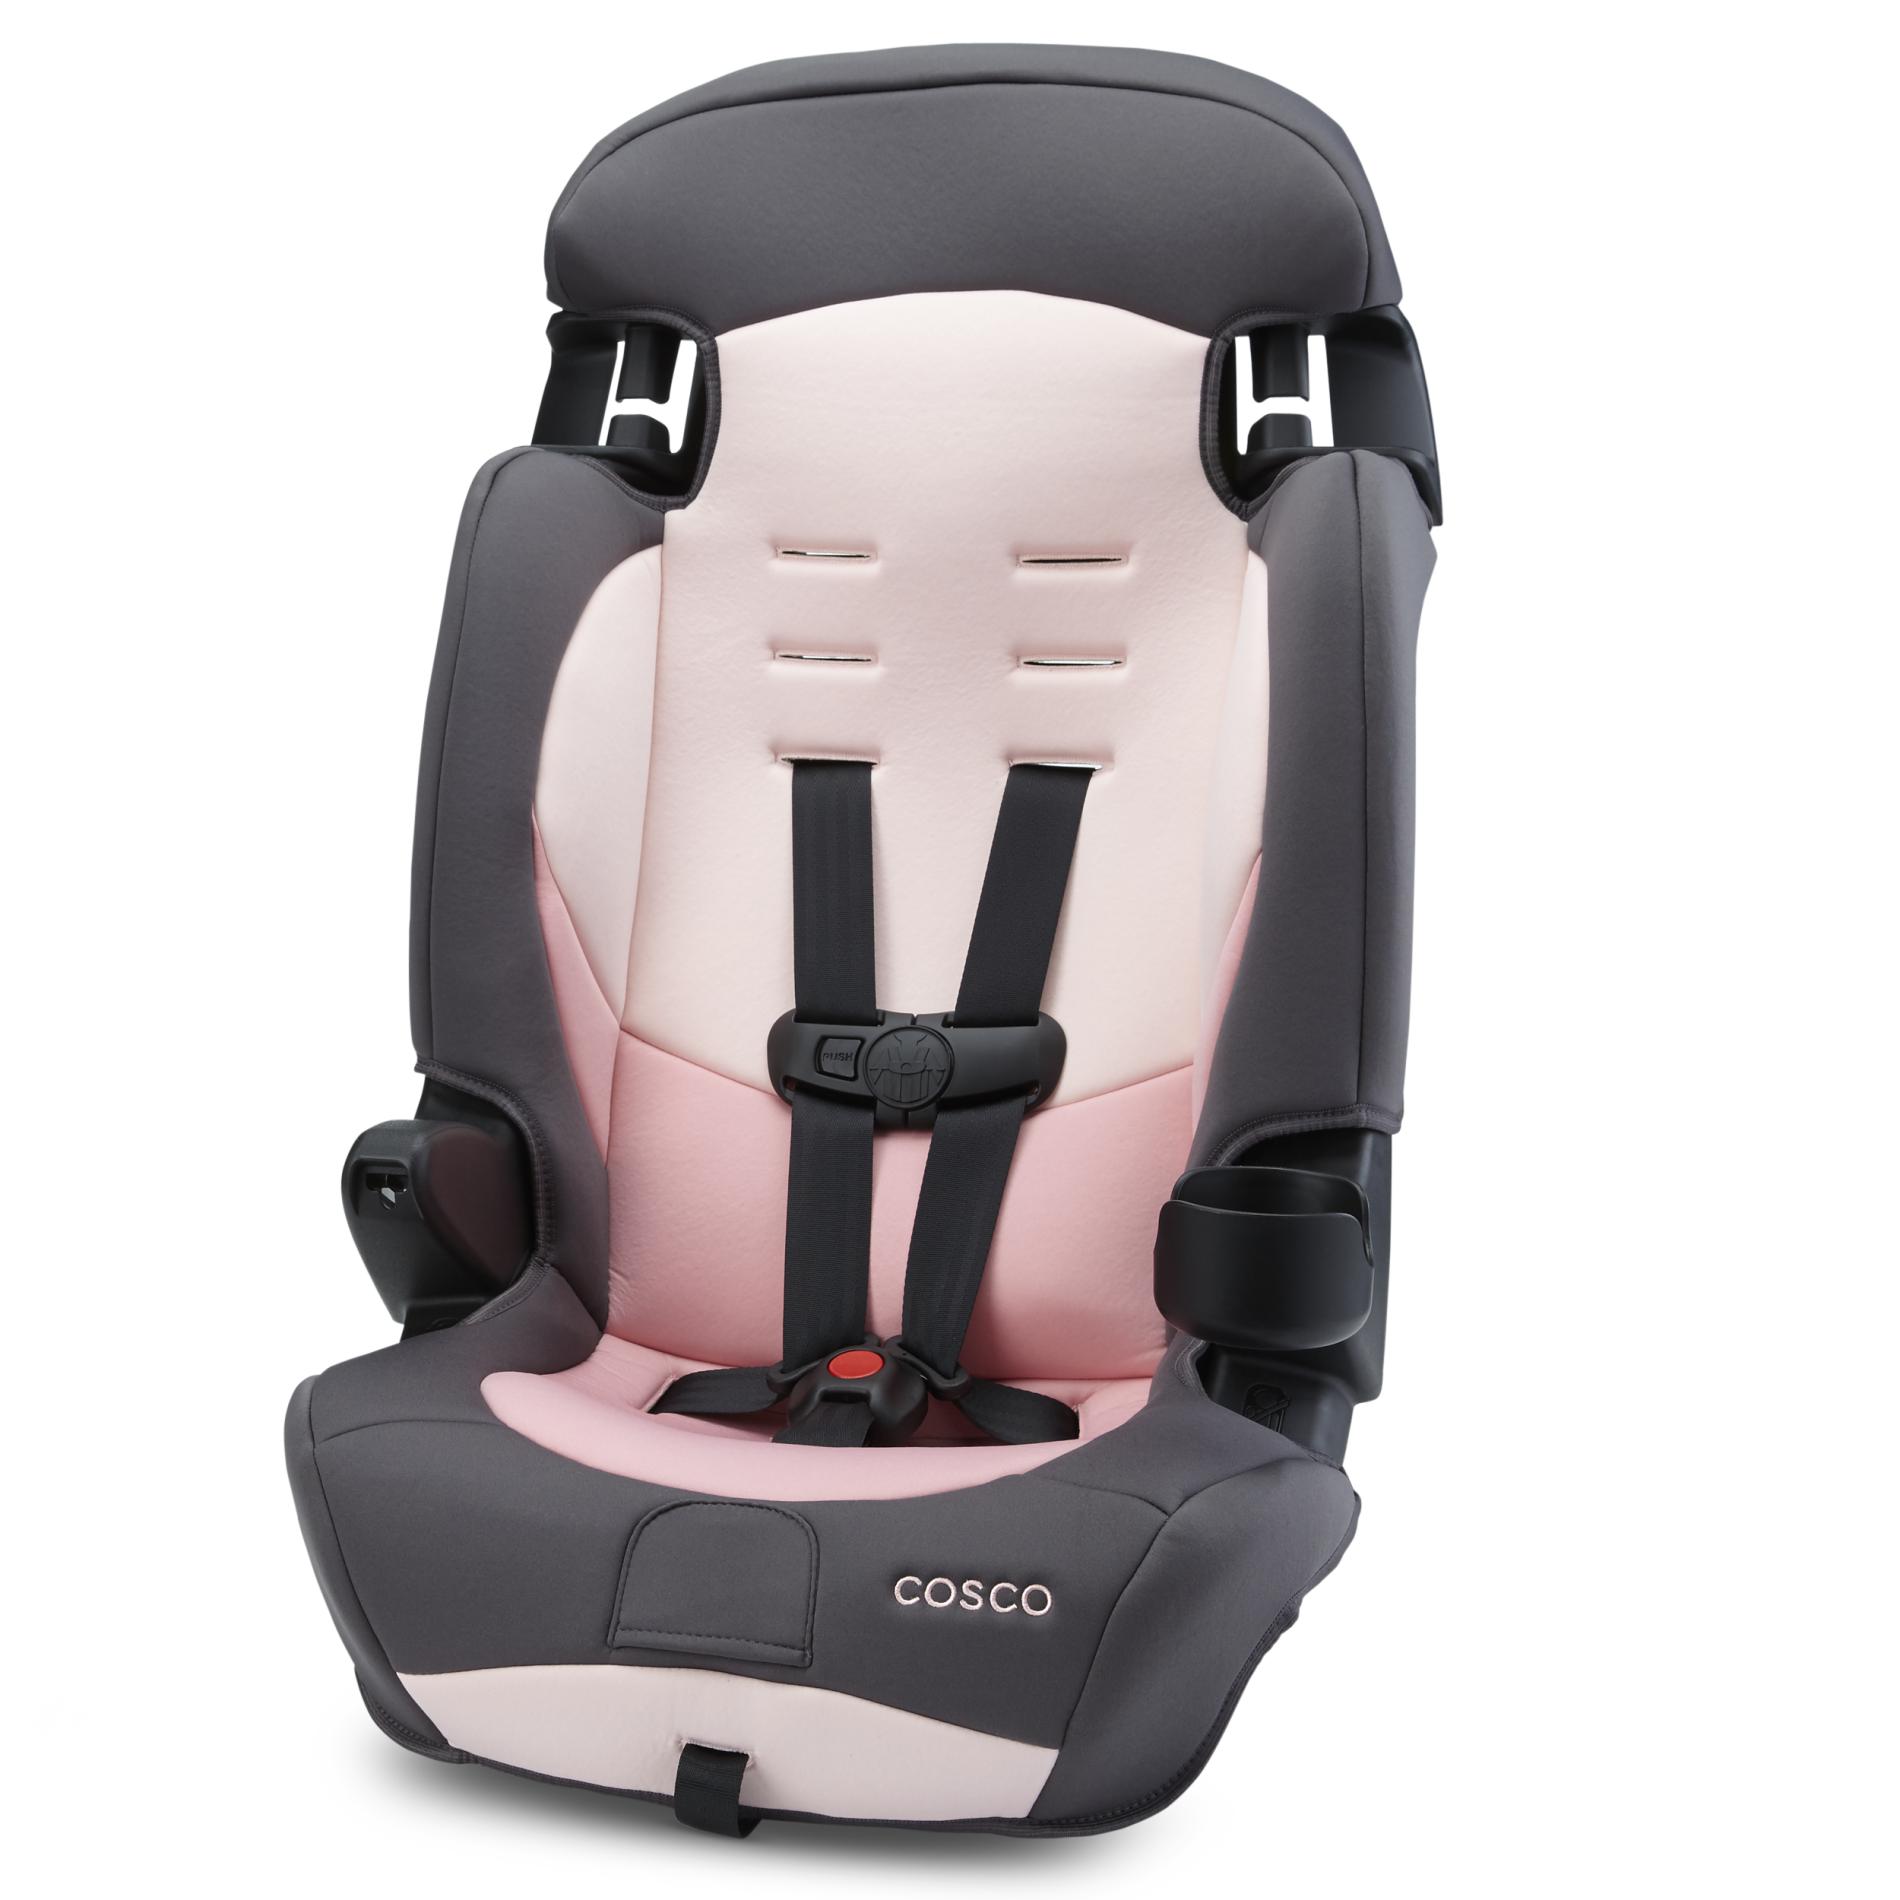 Cosco Girls' Finale DX 2-in-1 Booster Car Seat